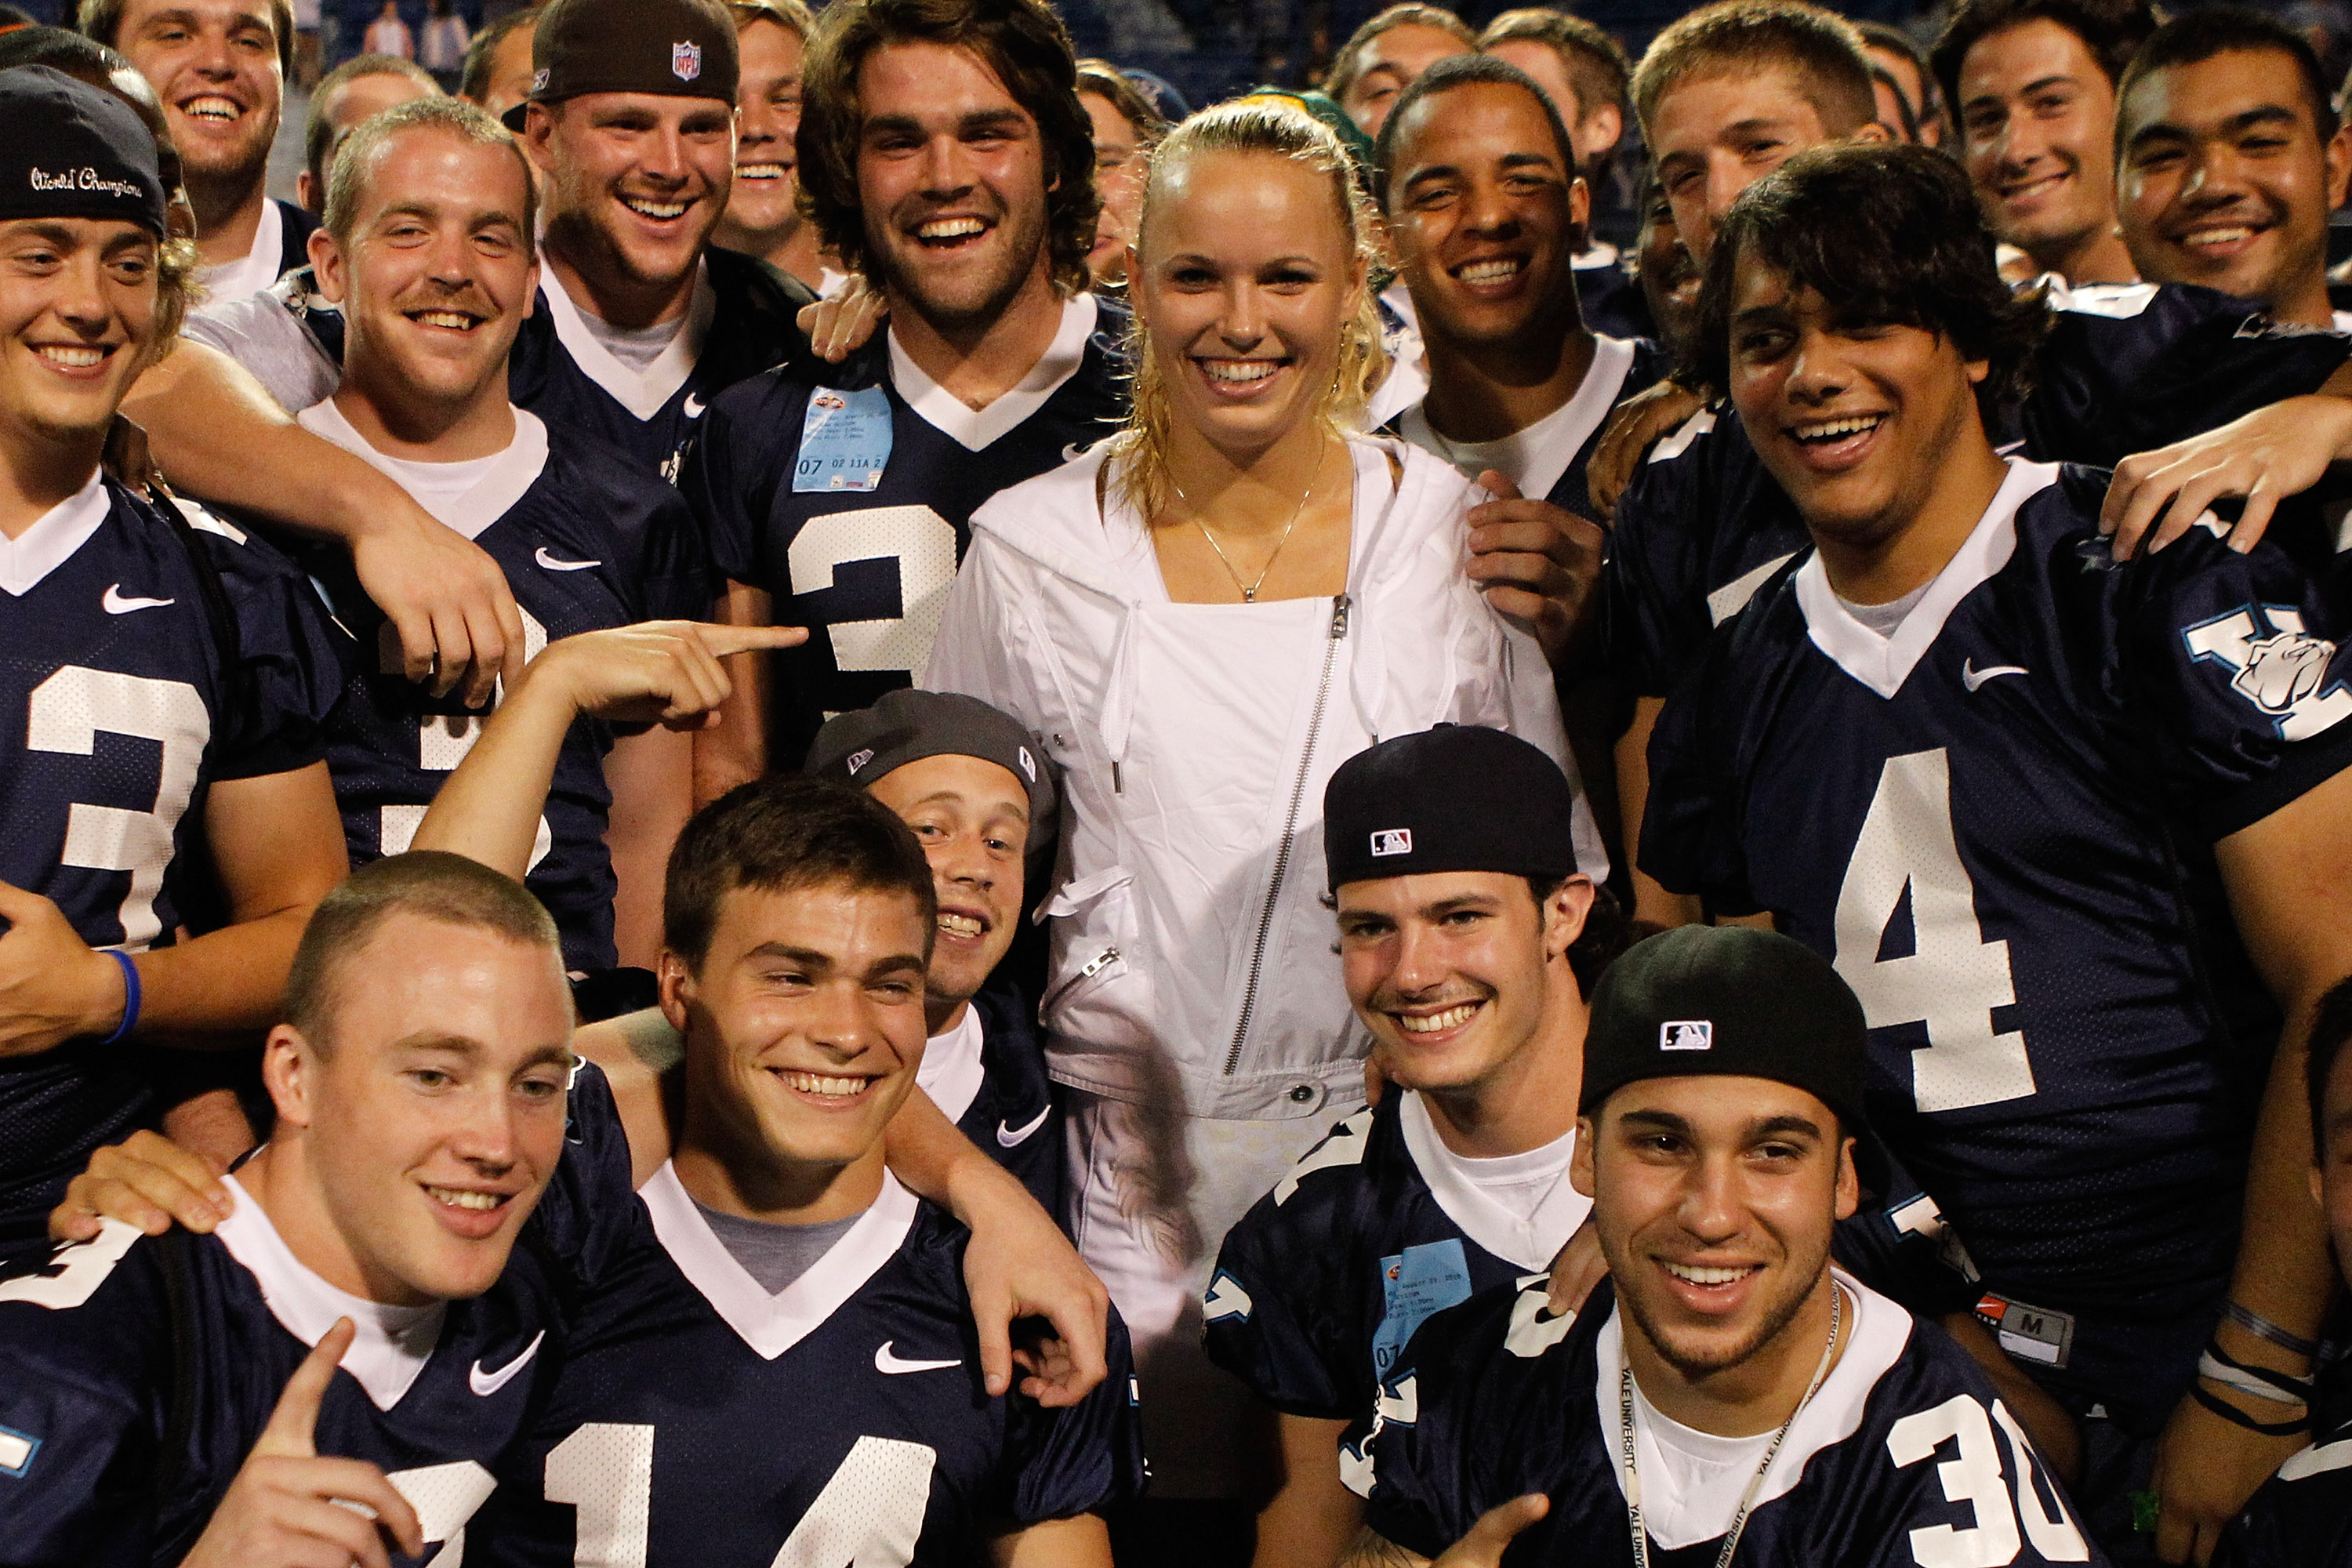 NEW HAVEN, CT - AUGUST 25:  Caroline Wozniacki of Denmark poses with members of the Yale football team in attendance for her match with Dominika Cibulkova of Slovakia during the Pilot Pen tennis tournament at the Connecticut Tennis Center on August 25, 20